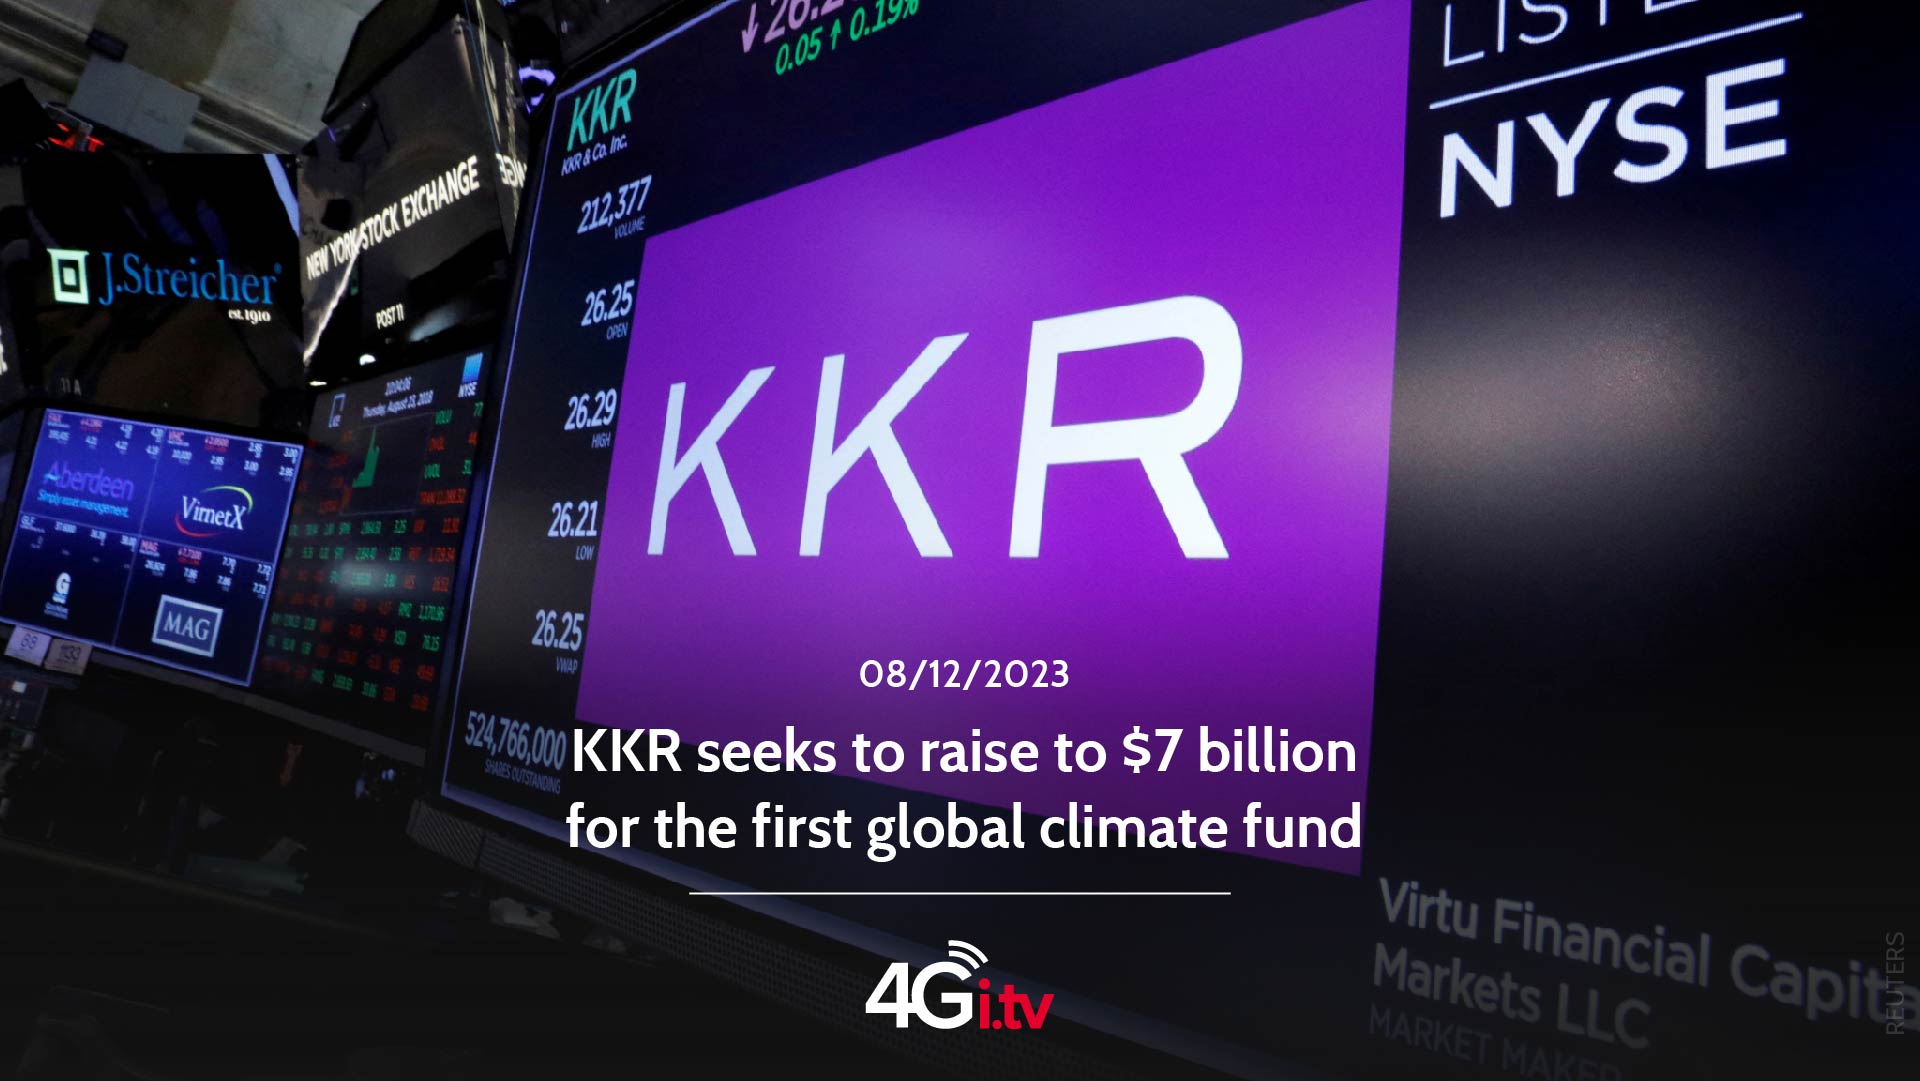 Подробнее о статье KKR seeks to raise to $7 billion for the first global climate fund